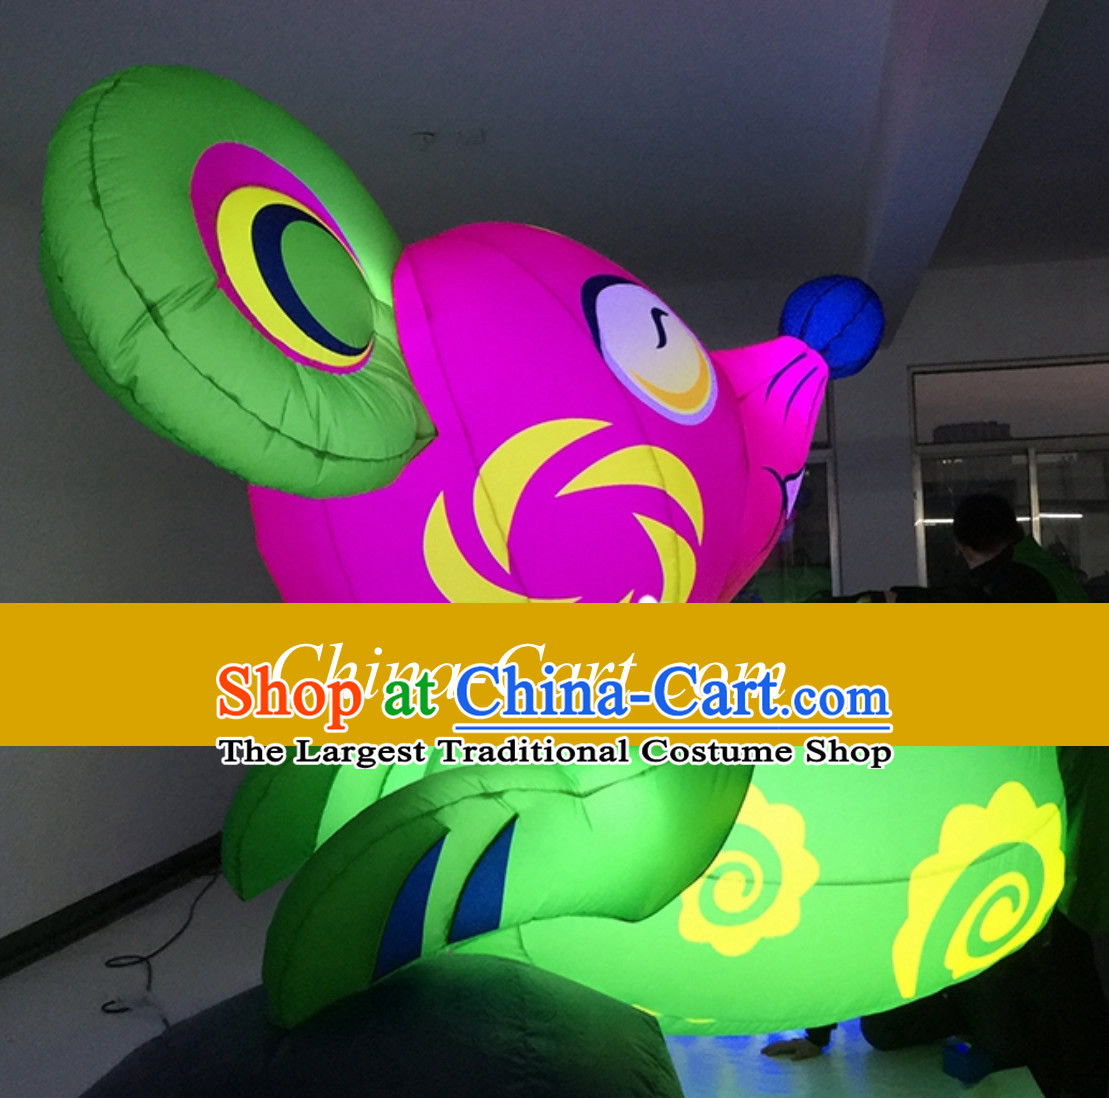 Chinese New Year Decorations Giant Inflatable Lucky Rat Complete Set